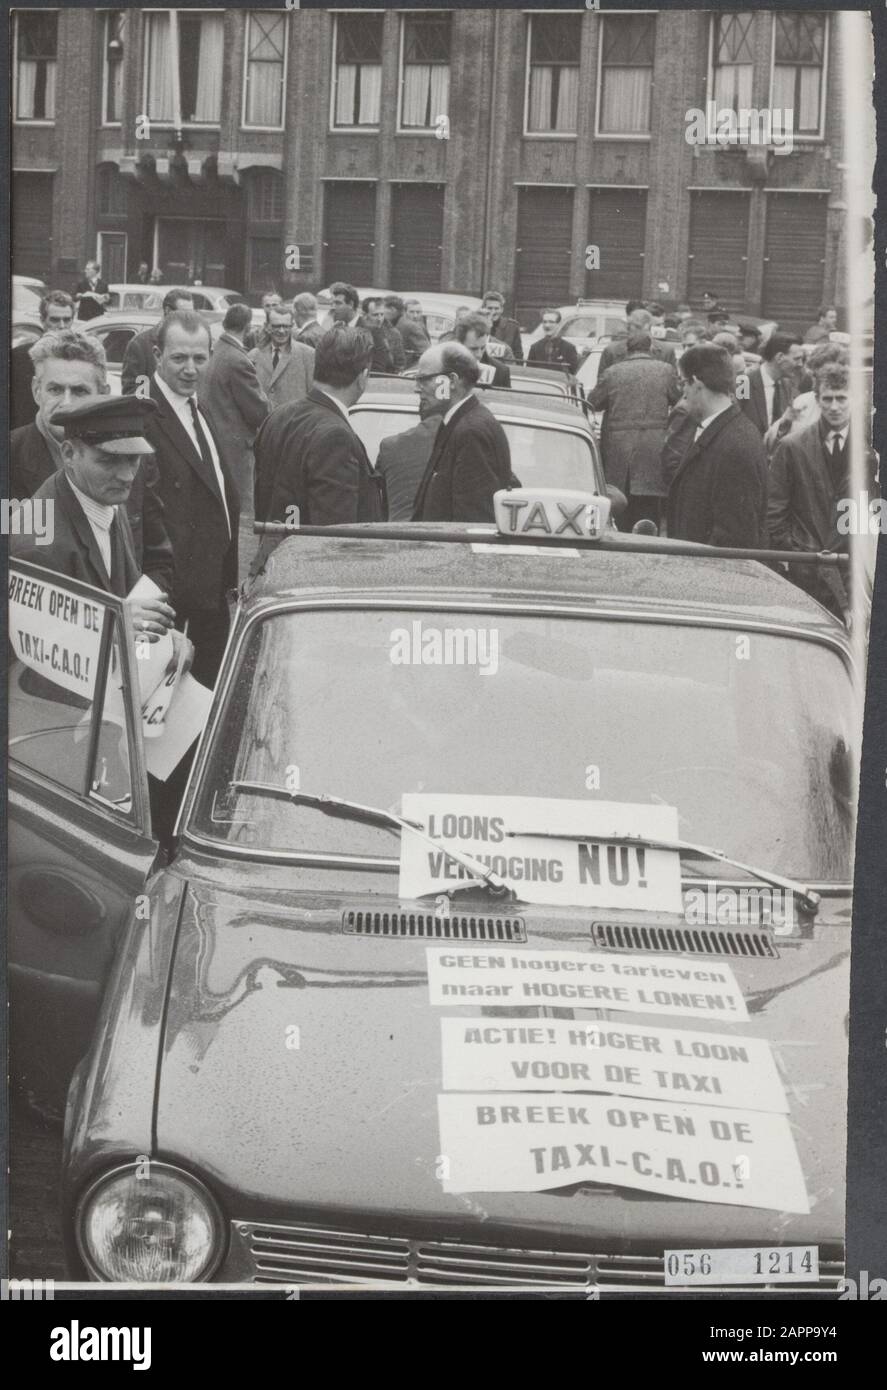 taxis, demonstrations, Protests, wage increase Date: March 28, 1965 Location: Amsterdam, Noord-Holland Keywords: Protests, demonstrations, wage increases, taxis Stock Photo